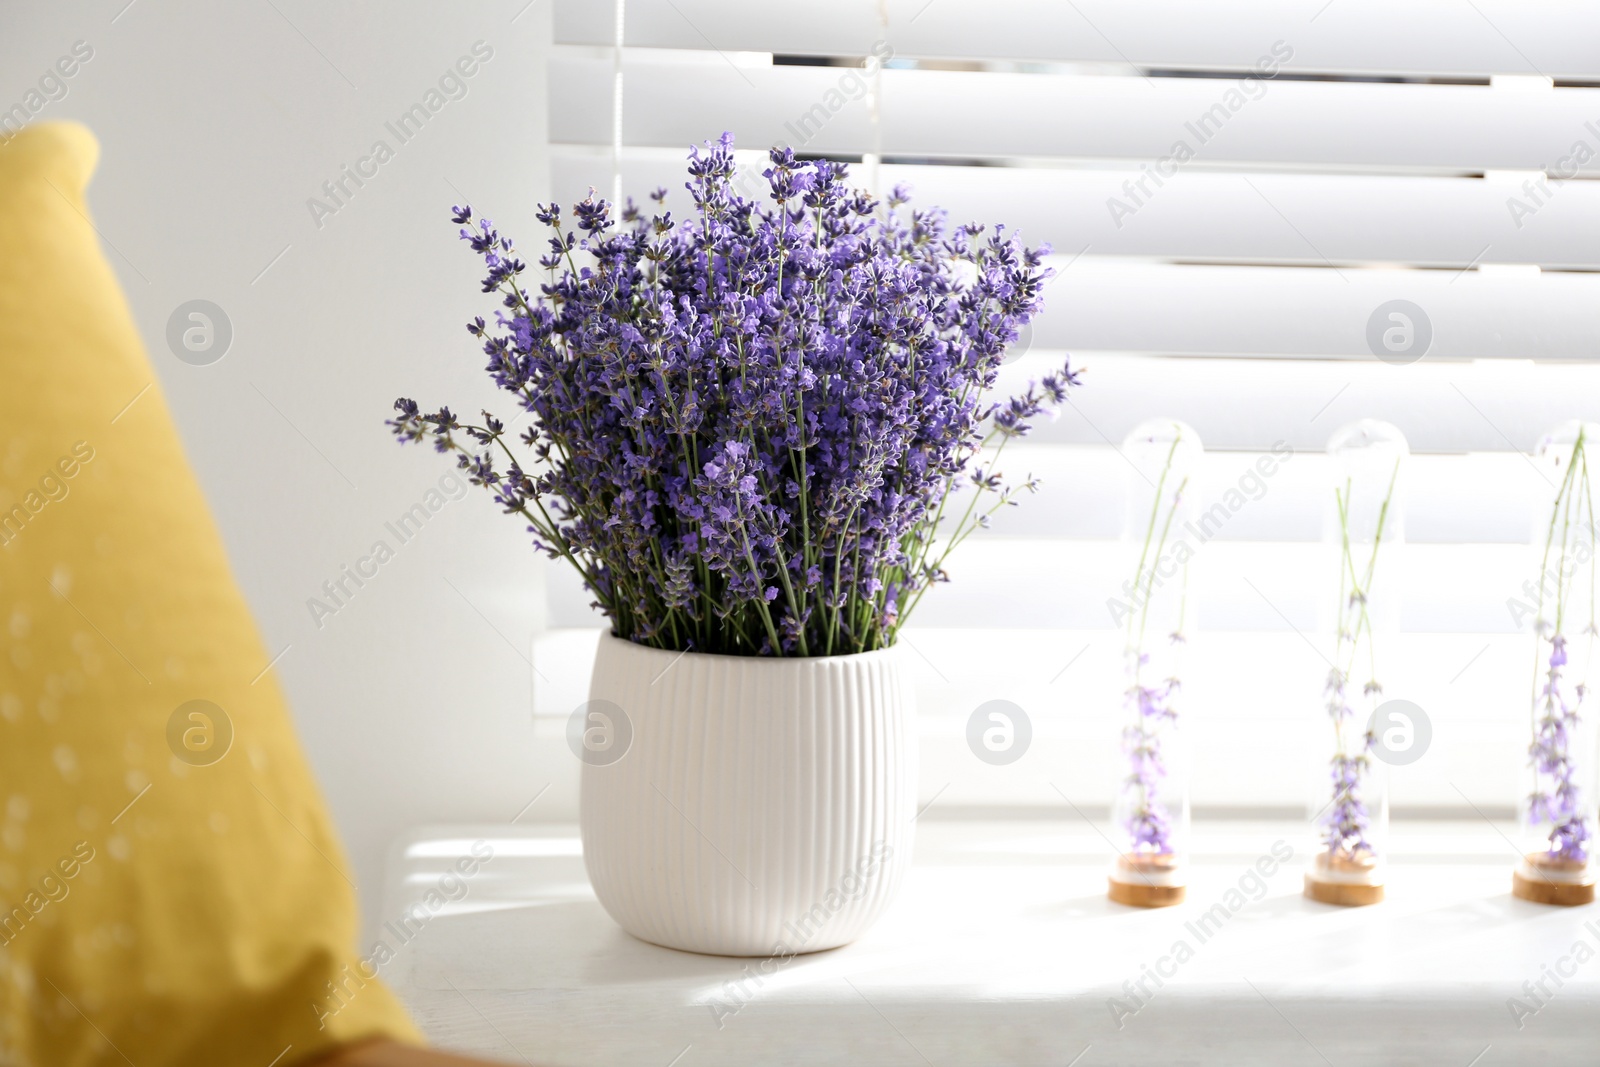 Photo of Beautiful lavender flowers on window sill indoors